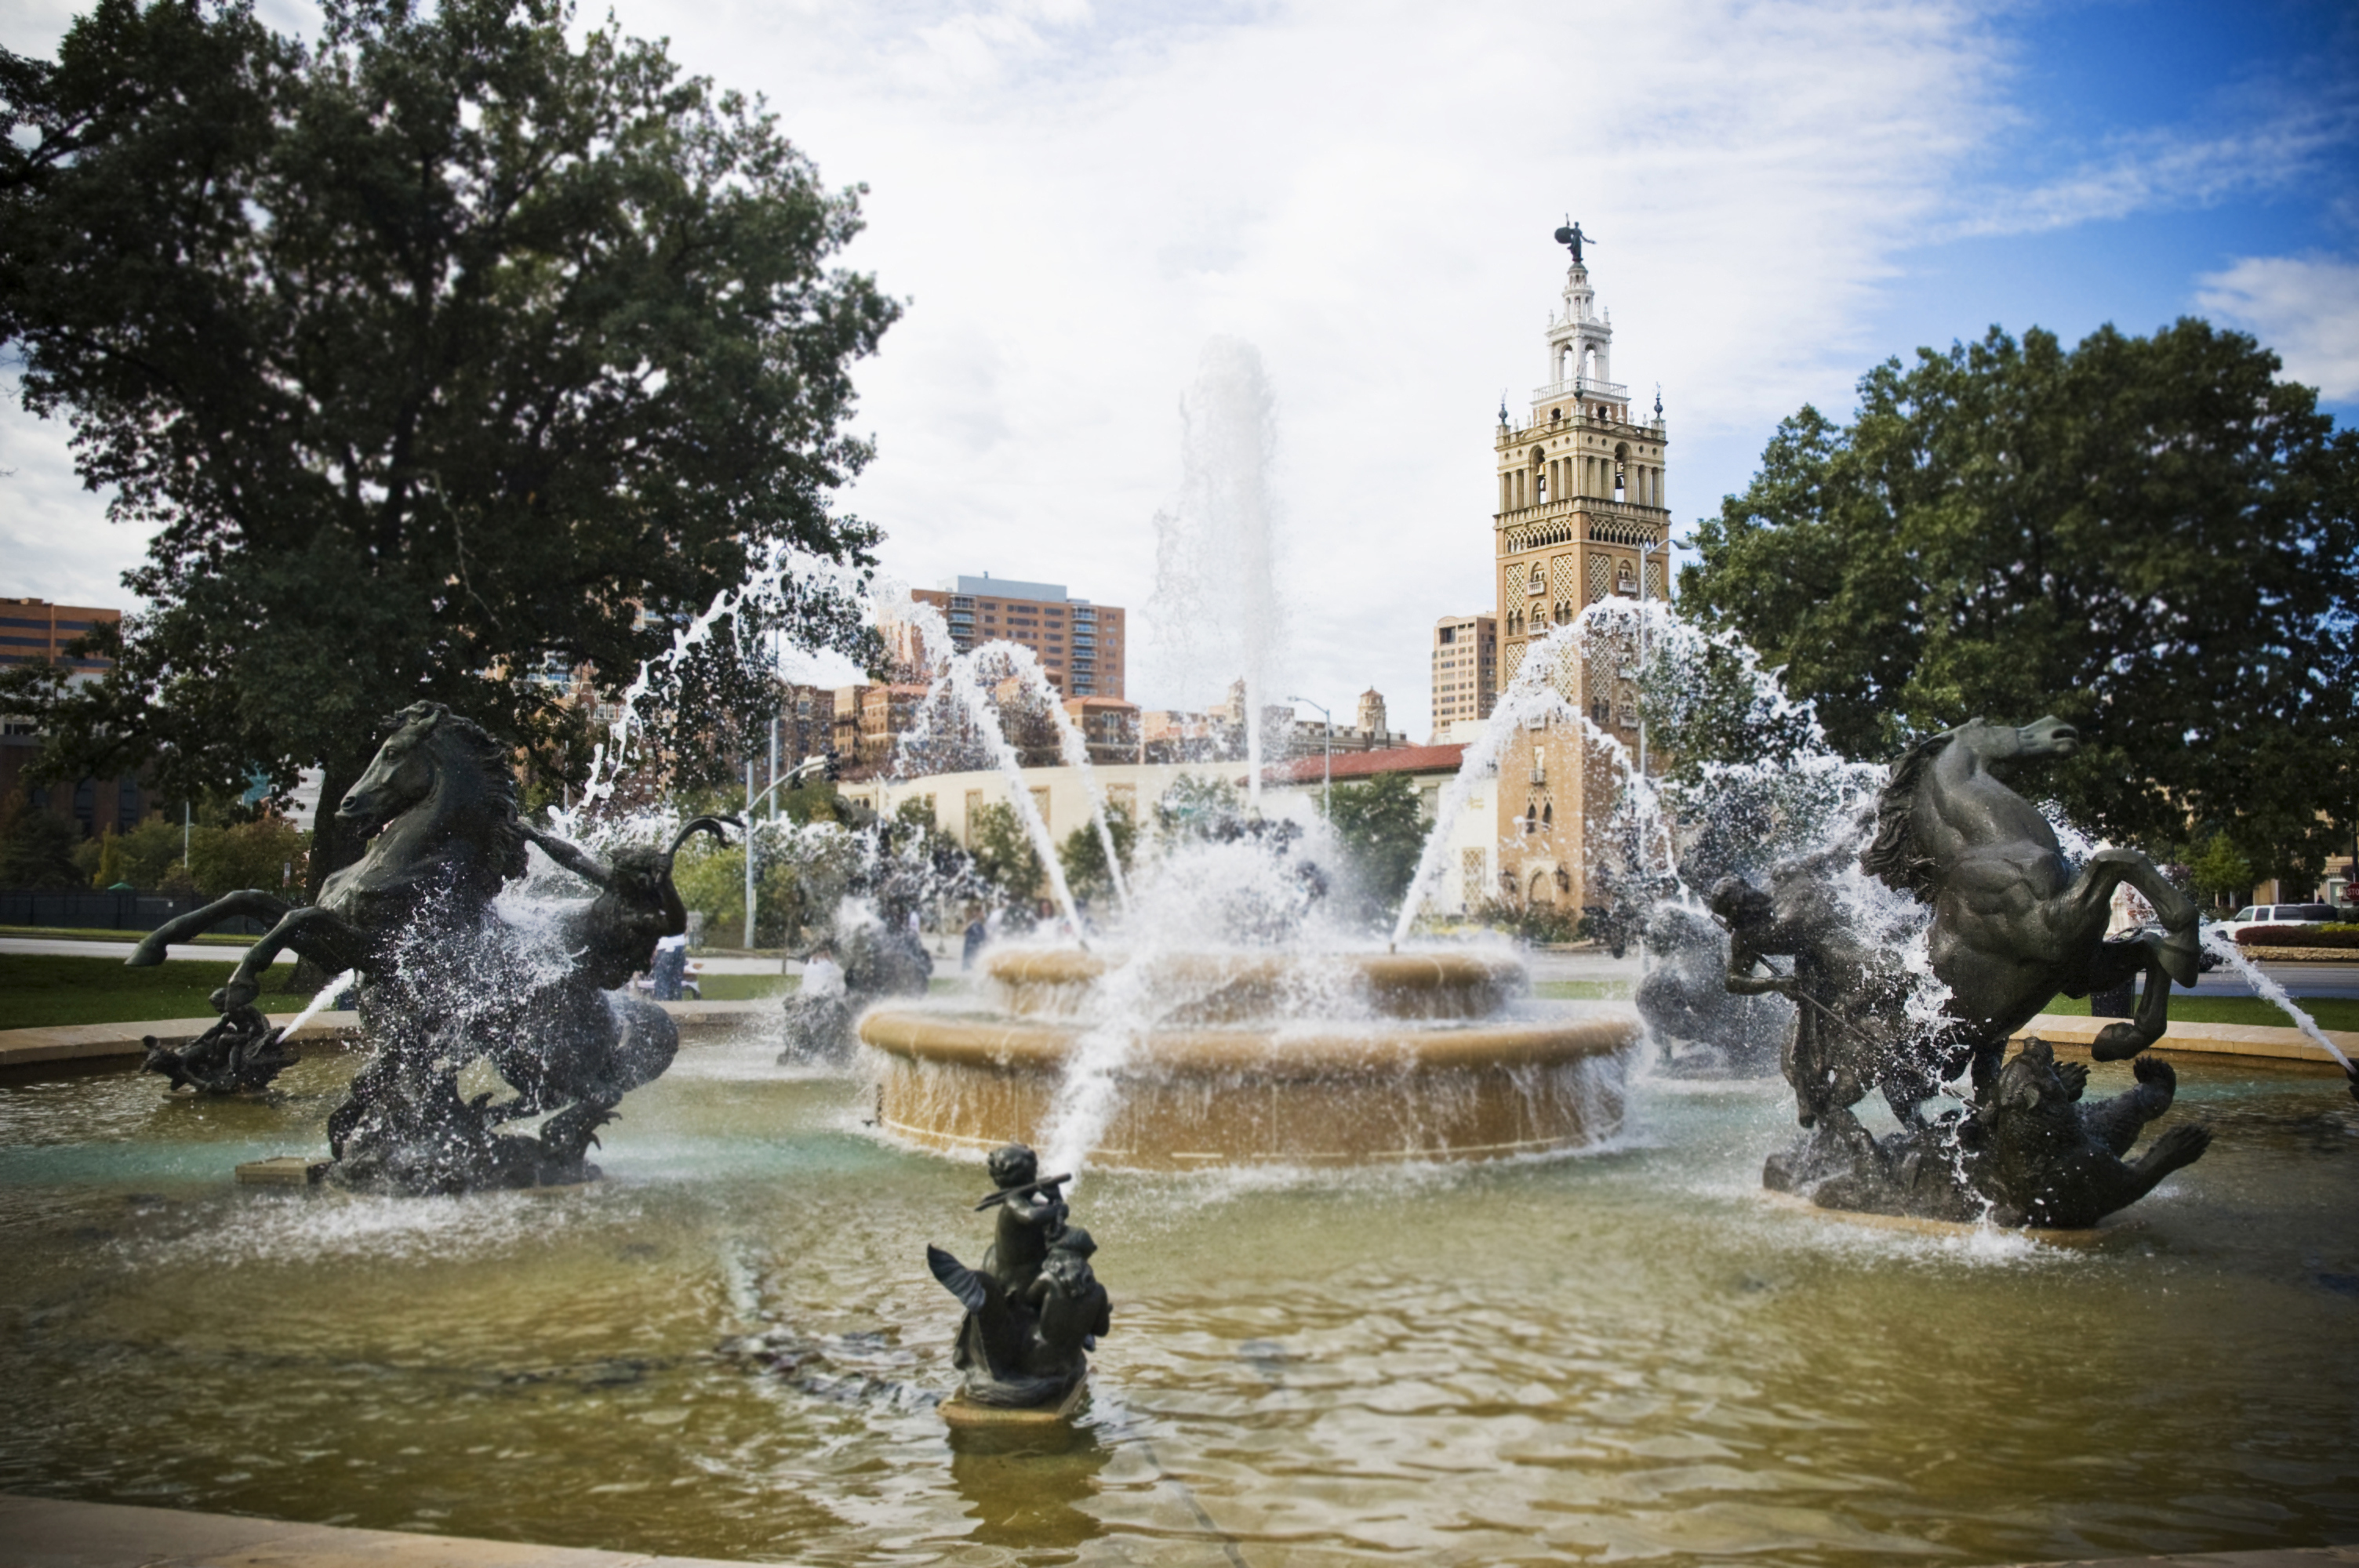 Country Club Plaza, Kansas City, Missouri, is America's oldest shopping centre